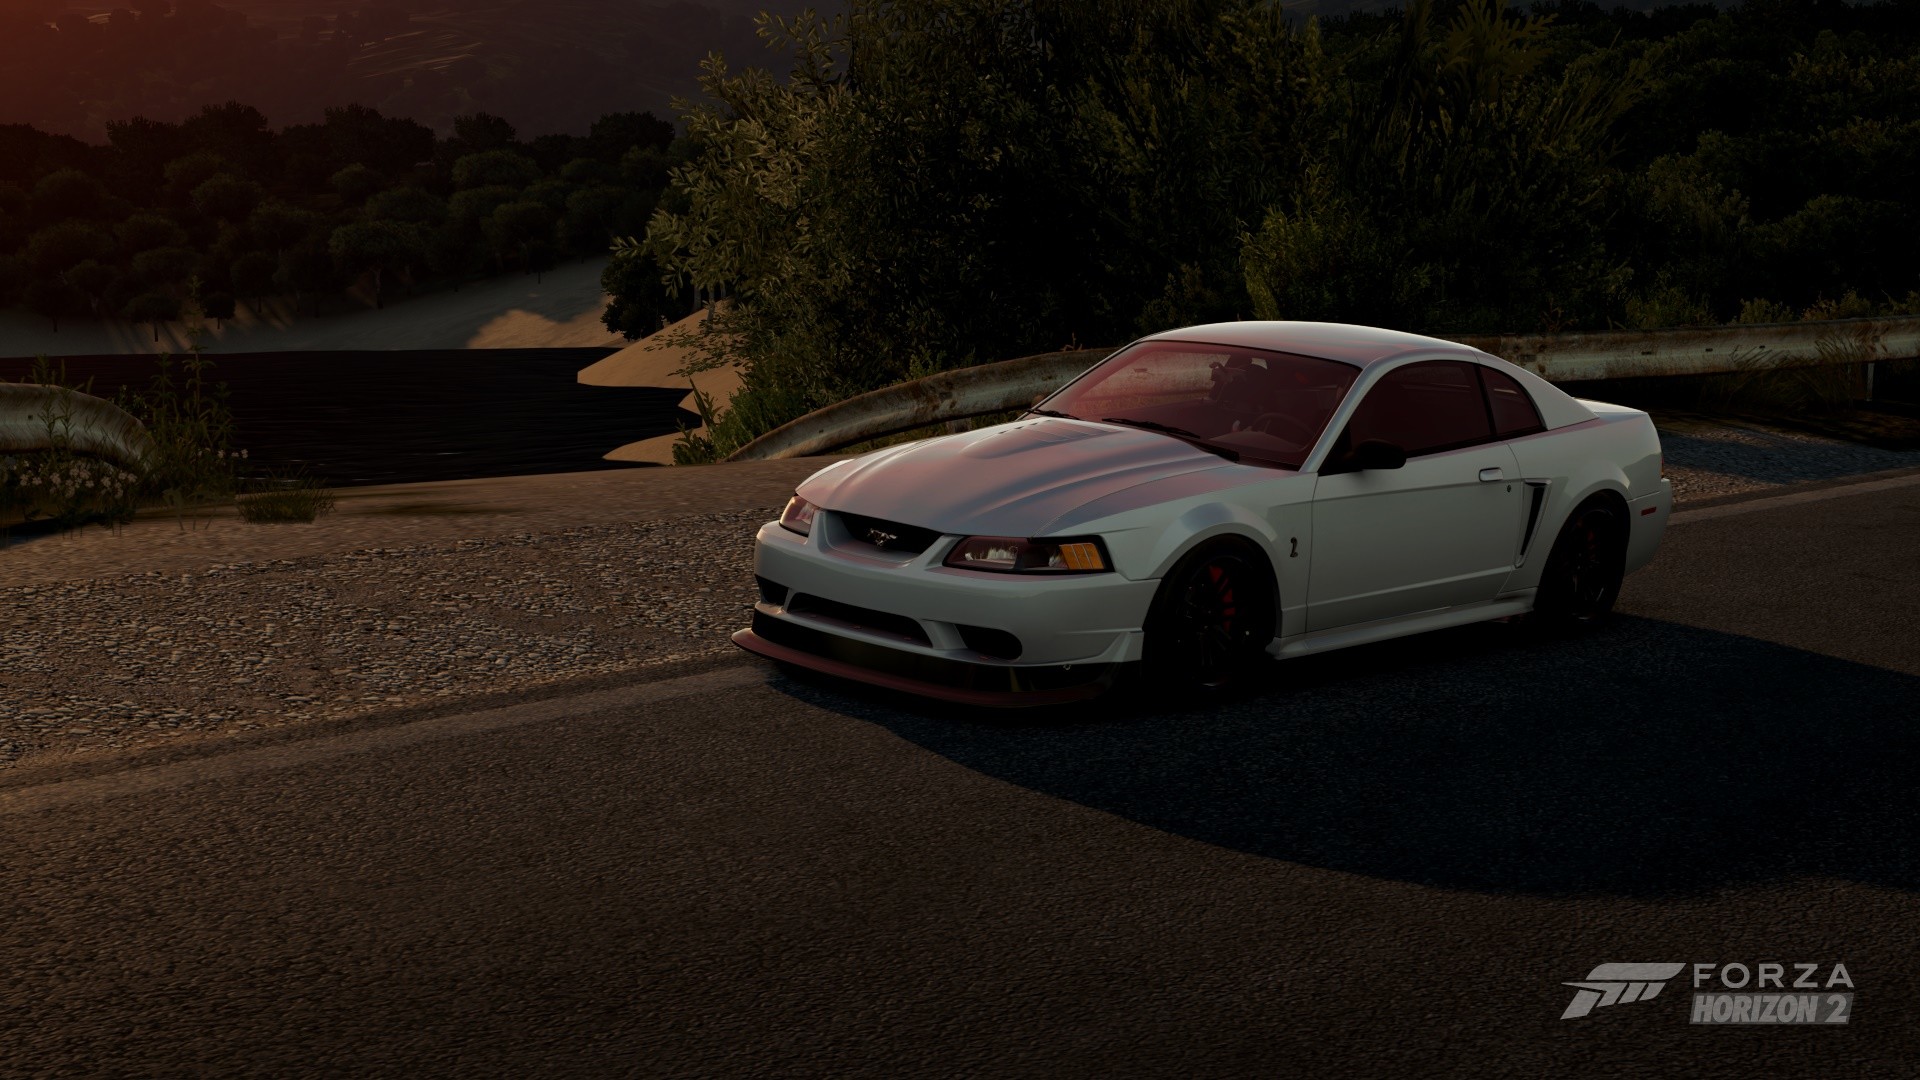 1920x1080 Heres my cobra in fh2. I wish it was a terminator, but this'll do for now